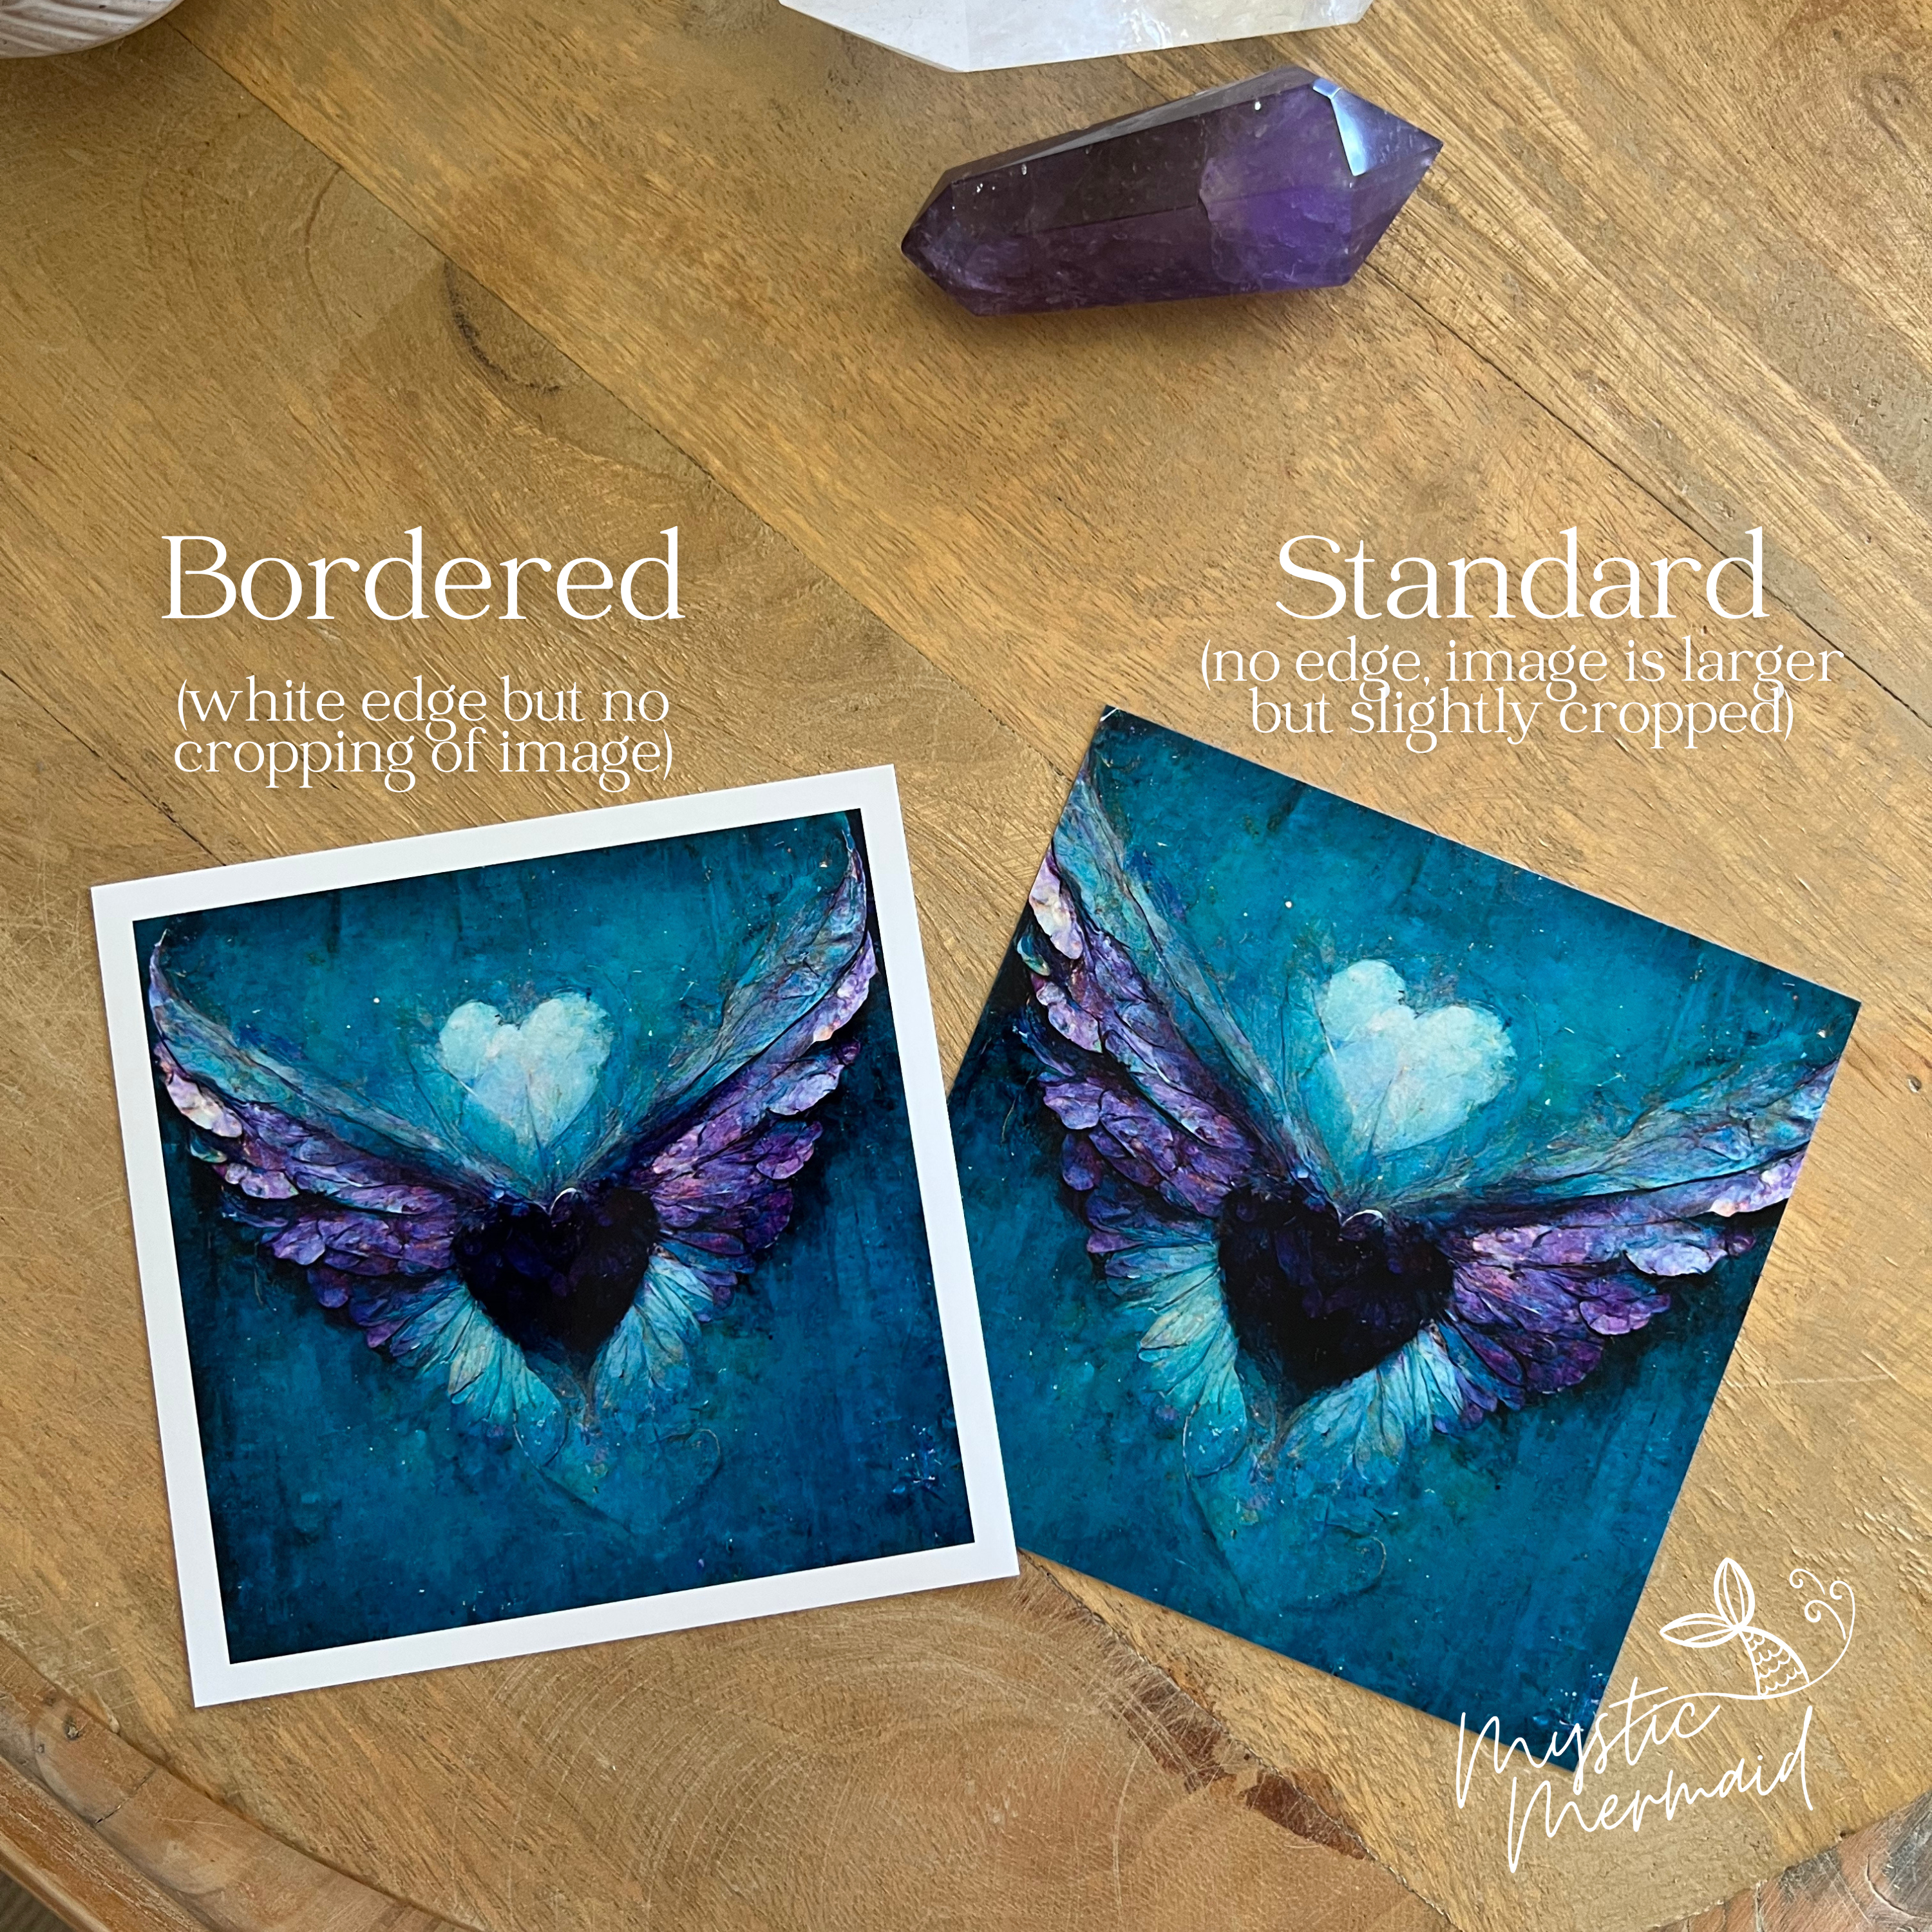 Go with All Your Heart - Amethyst Wings Glossy Photo Print of Art by Jenann McIntosh